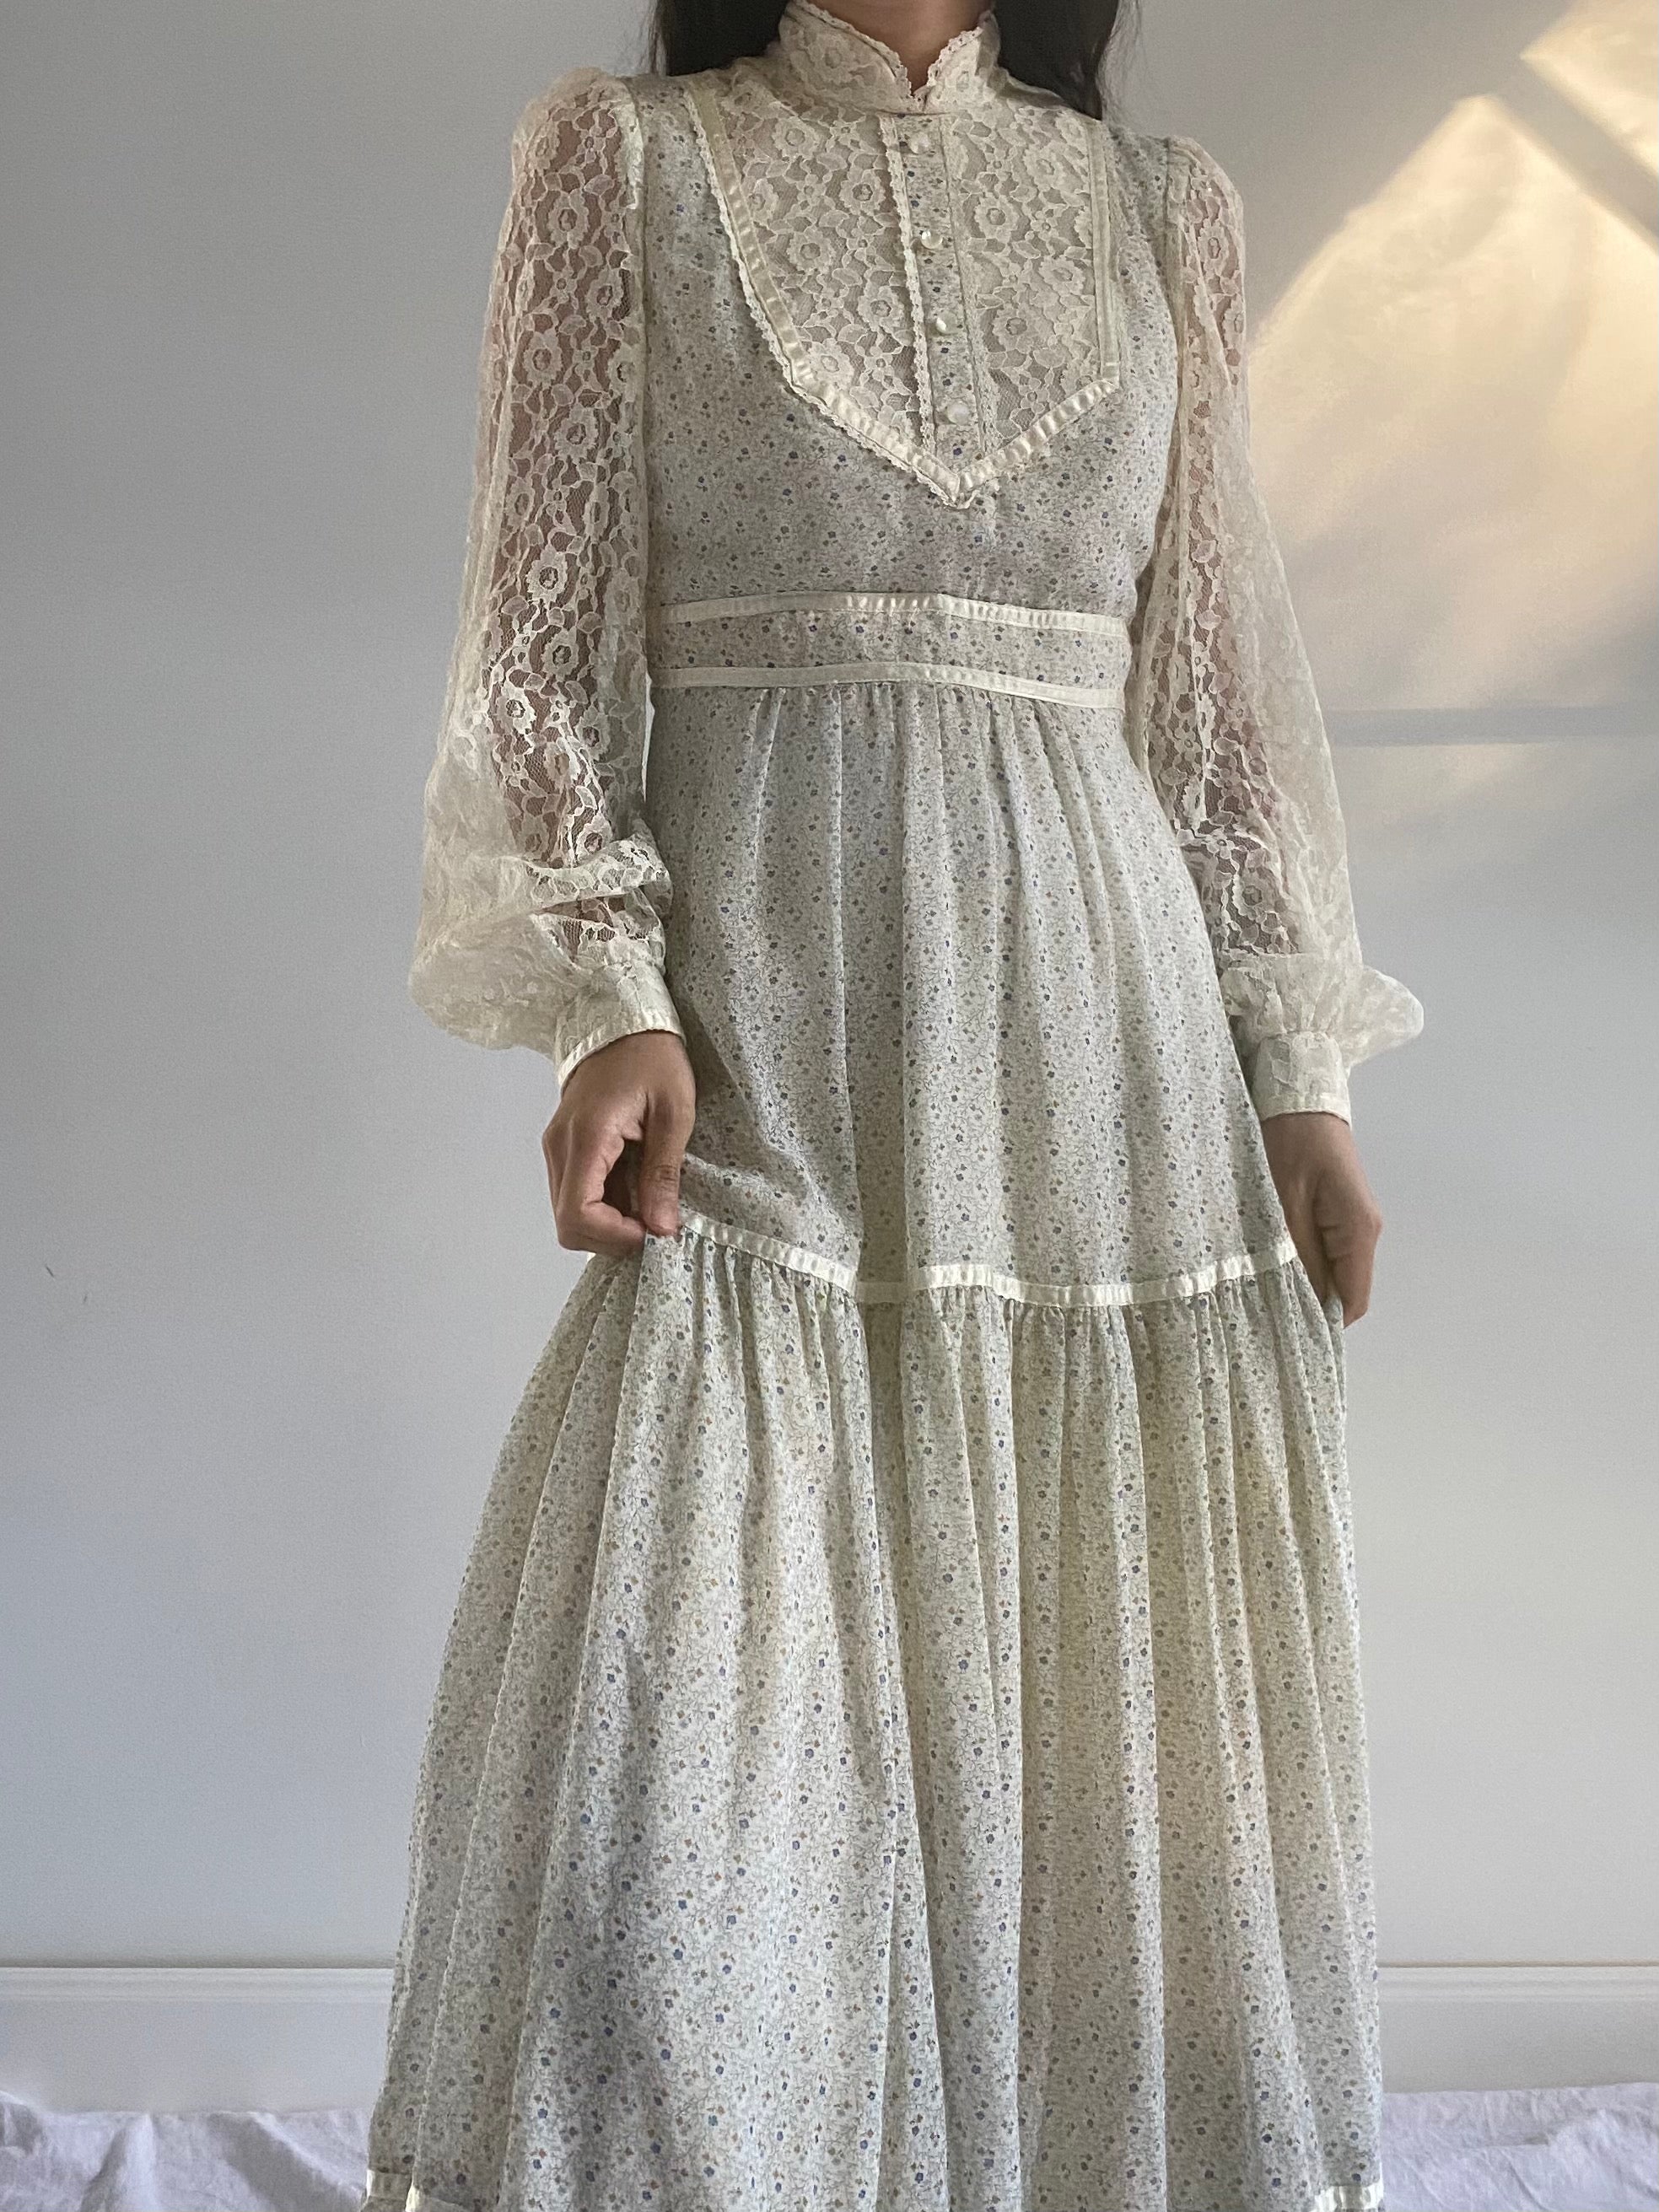 Vintage Lace Sleeves Calico Dress - XS/S